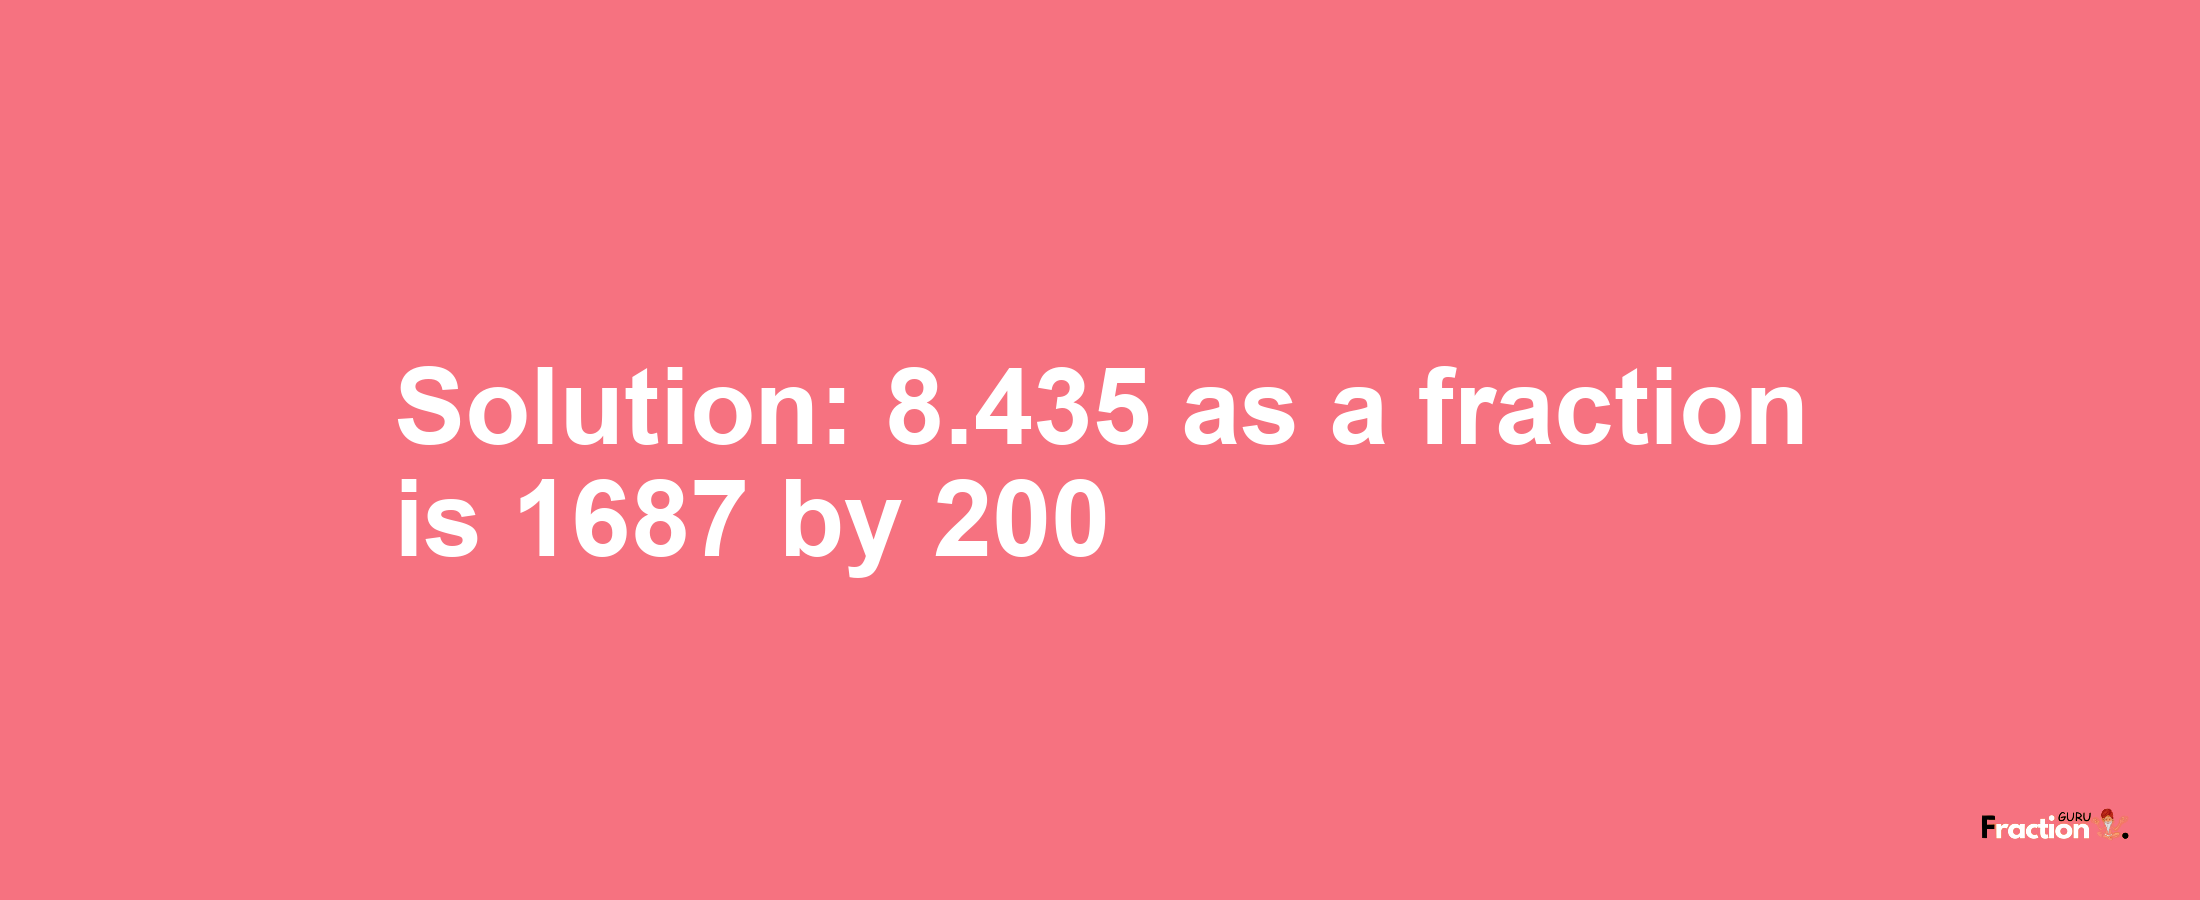 Solution:8.435 as a fraction is 1687/200